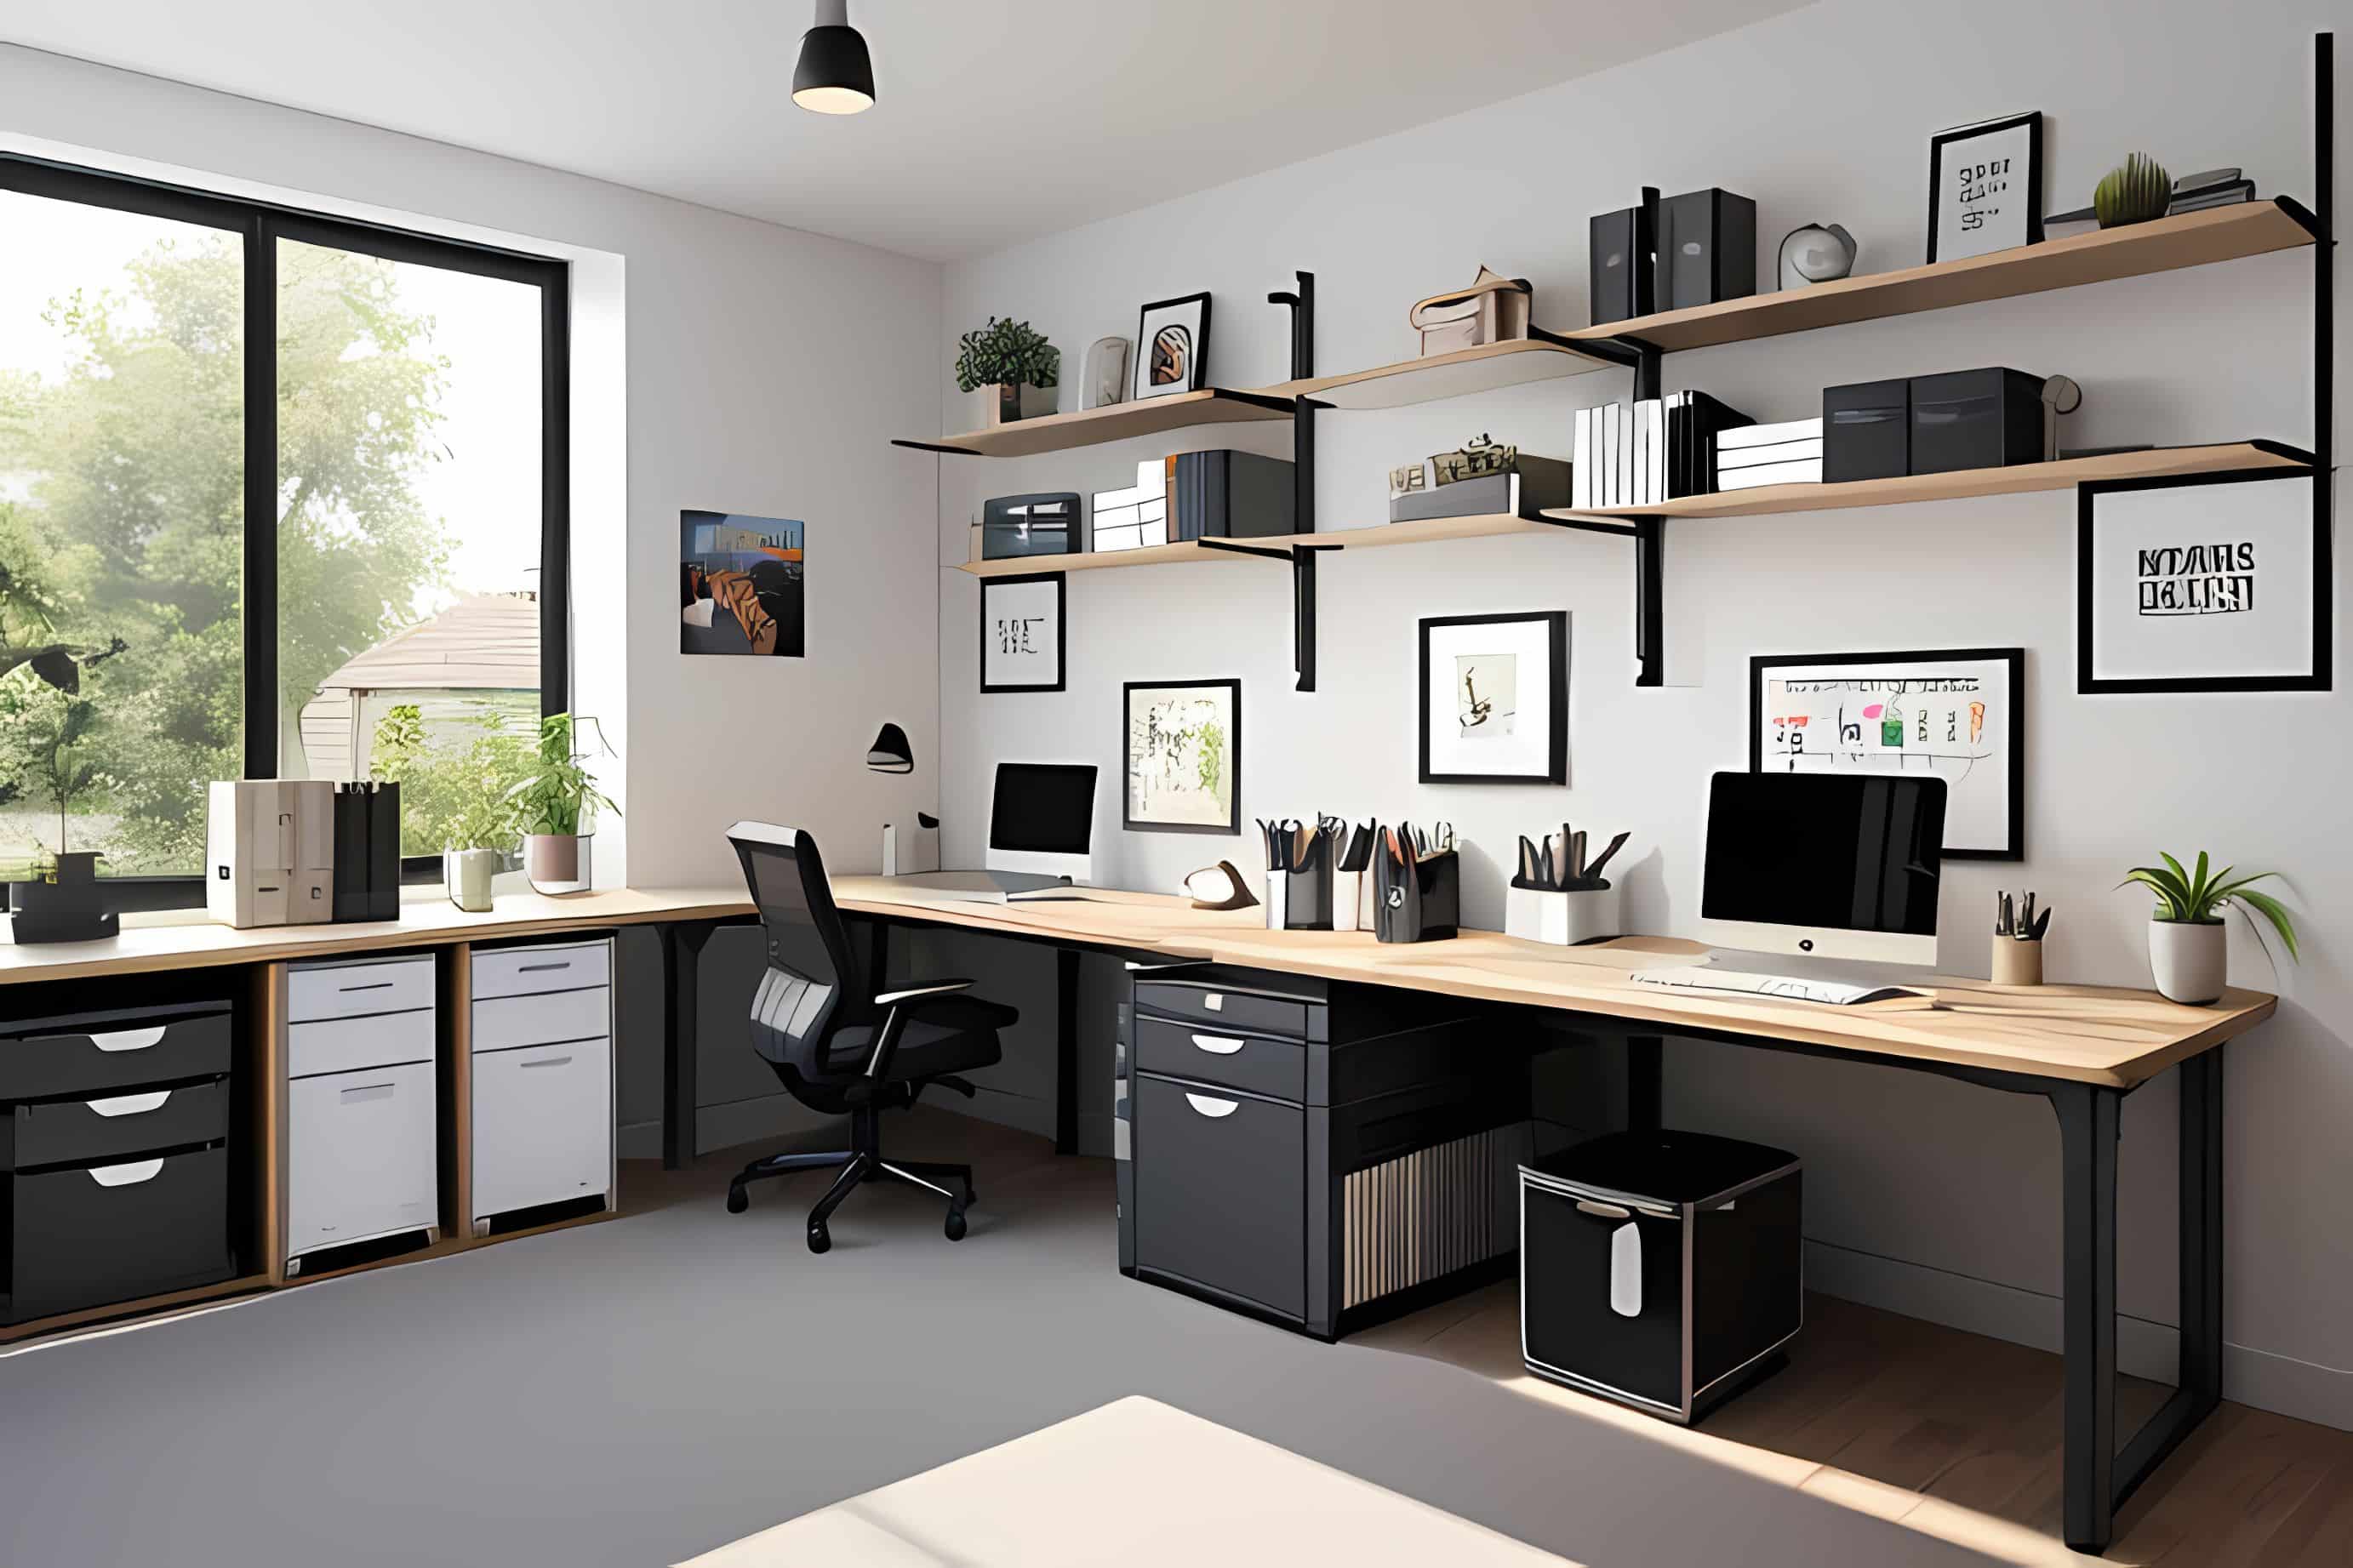 A Productive Home Office Environment Starts With A Dedicated Work Space